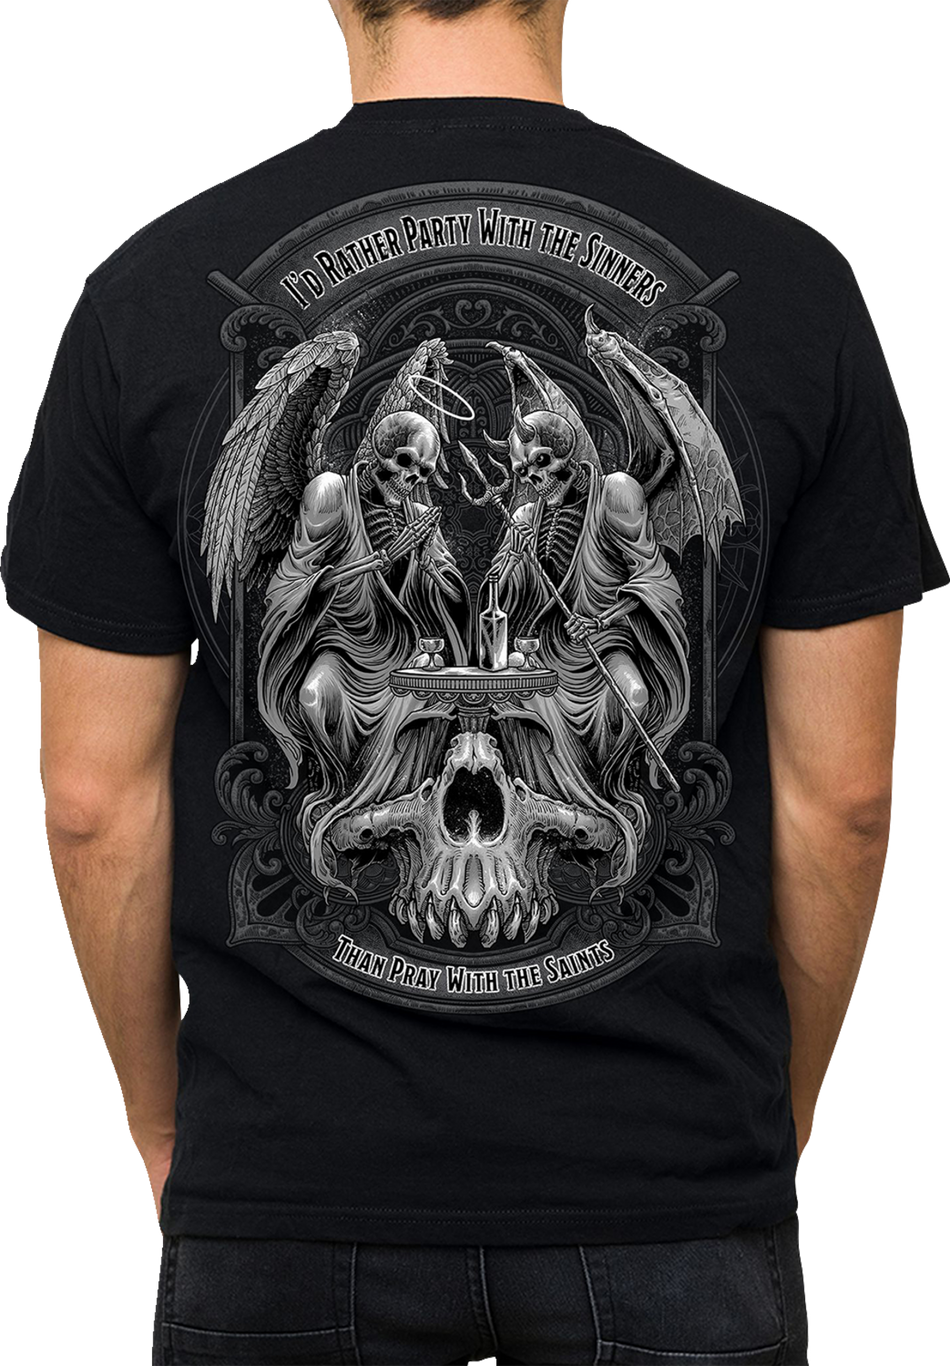 LETHAL THREAT Party with the Sinners T-Shirt - Black - 4XL LT20905-4XL